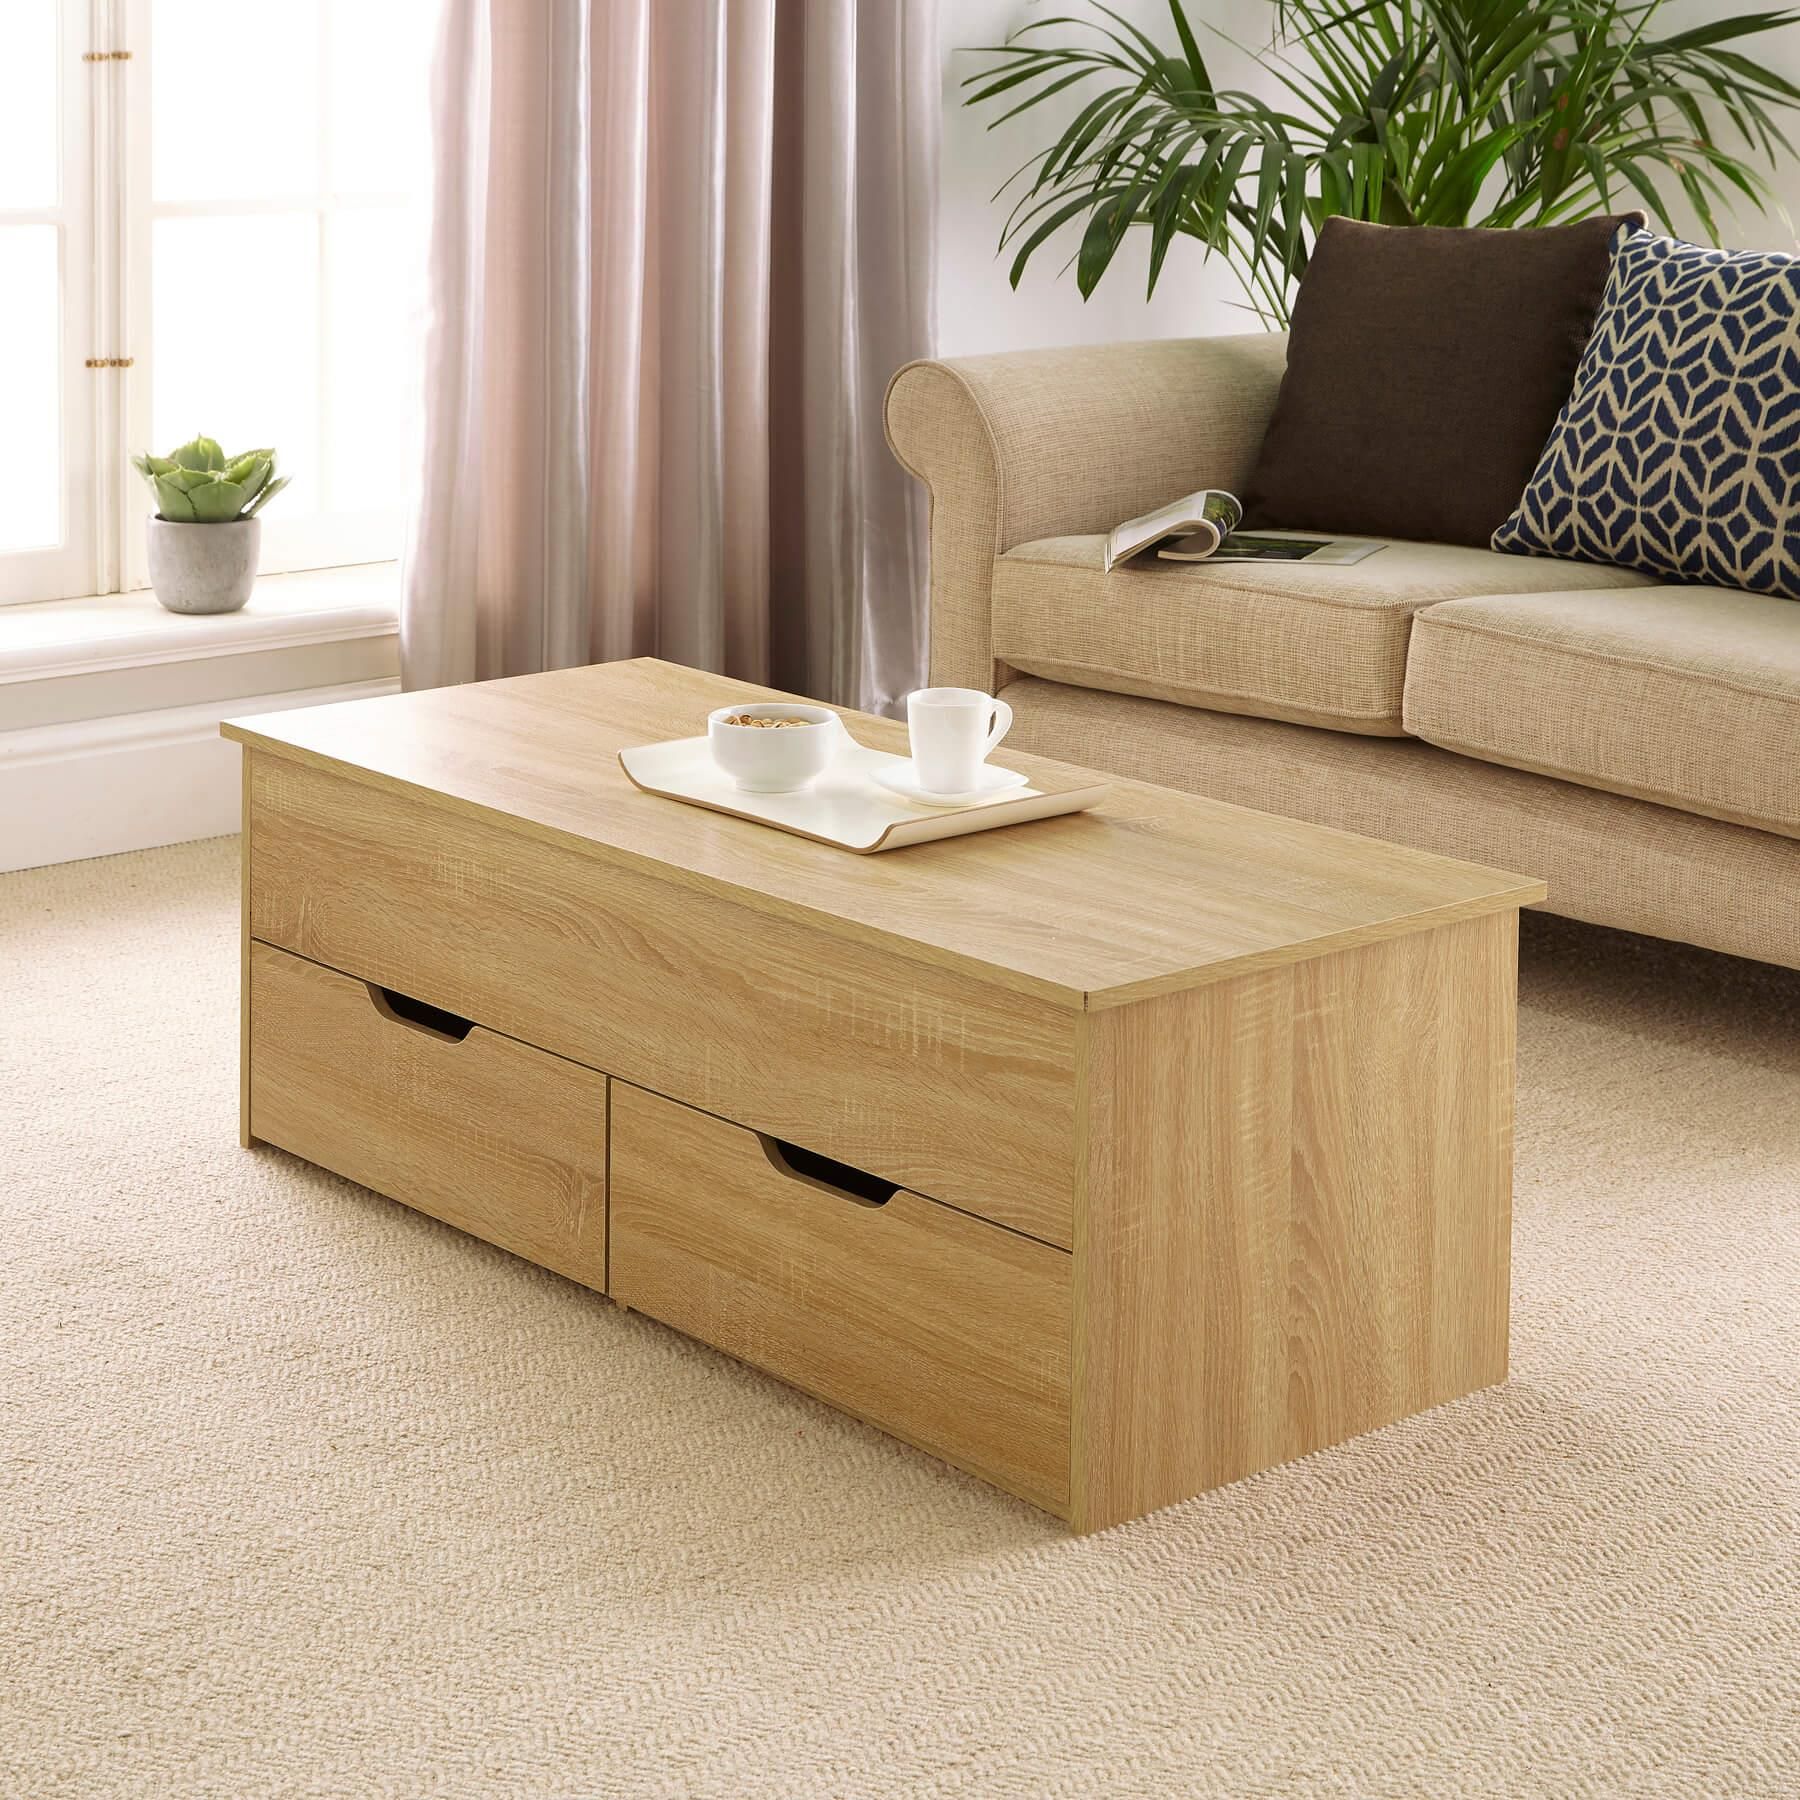 Oak Wooden Coffee Table With Lift Up Top And 2 Large Storage Drawers With Regard To Wood Lift Top Coffee Tables (View 10 of 20)